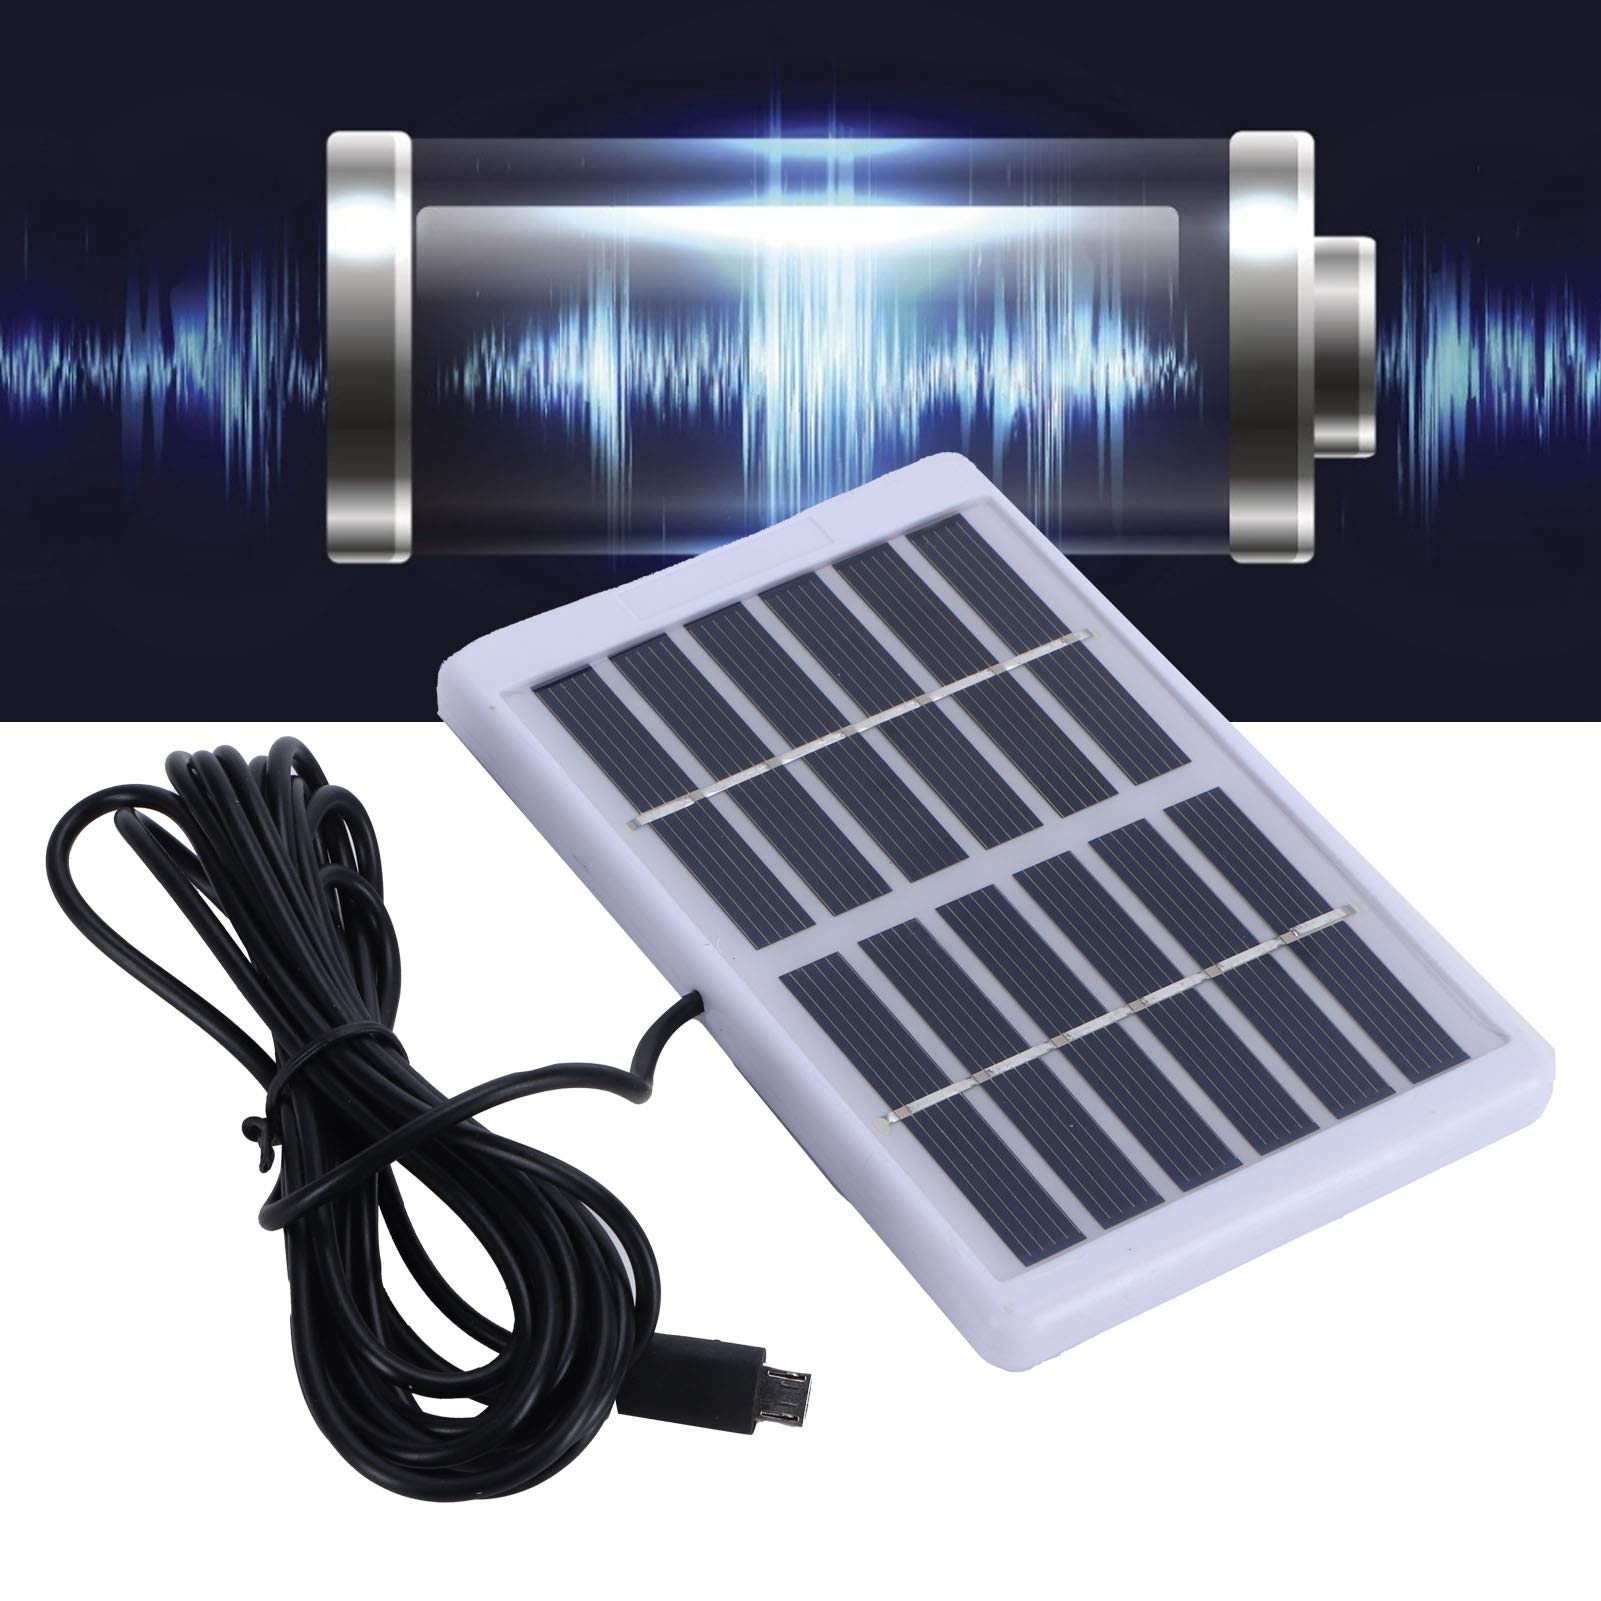 Solar Panel Charger, 1.2W 6V Solar Panel with Micro USB Port, Solar Charging Board, Polycrystalline Silicon Solar Charging Board for Small Home Projects